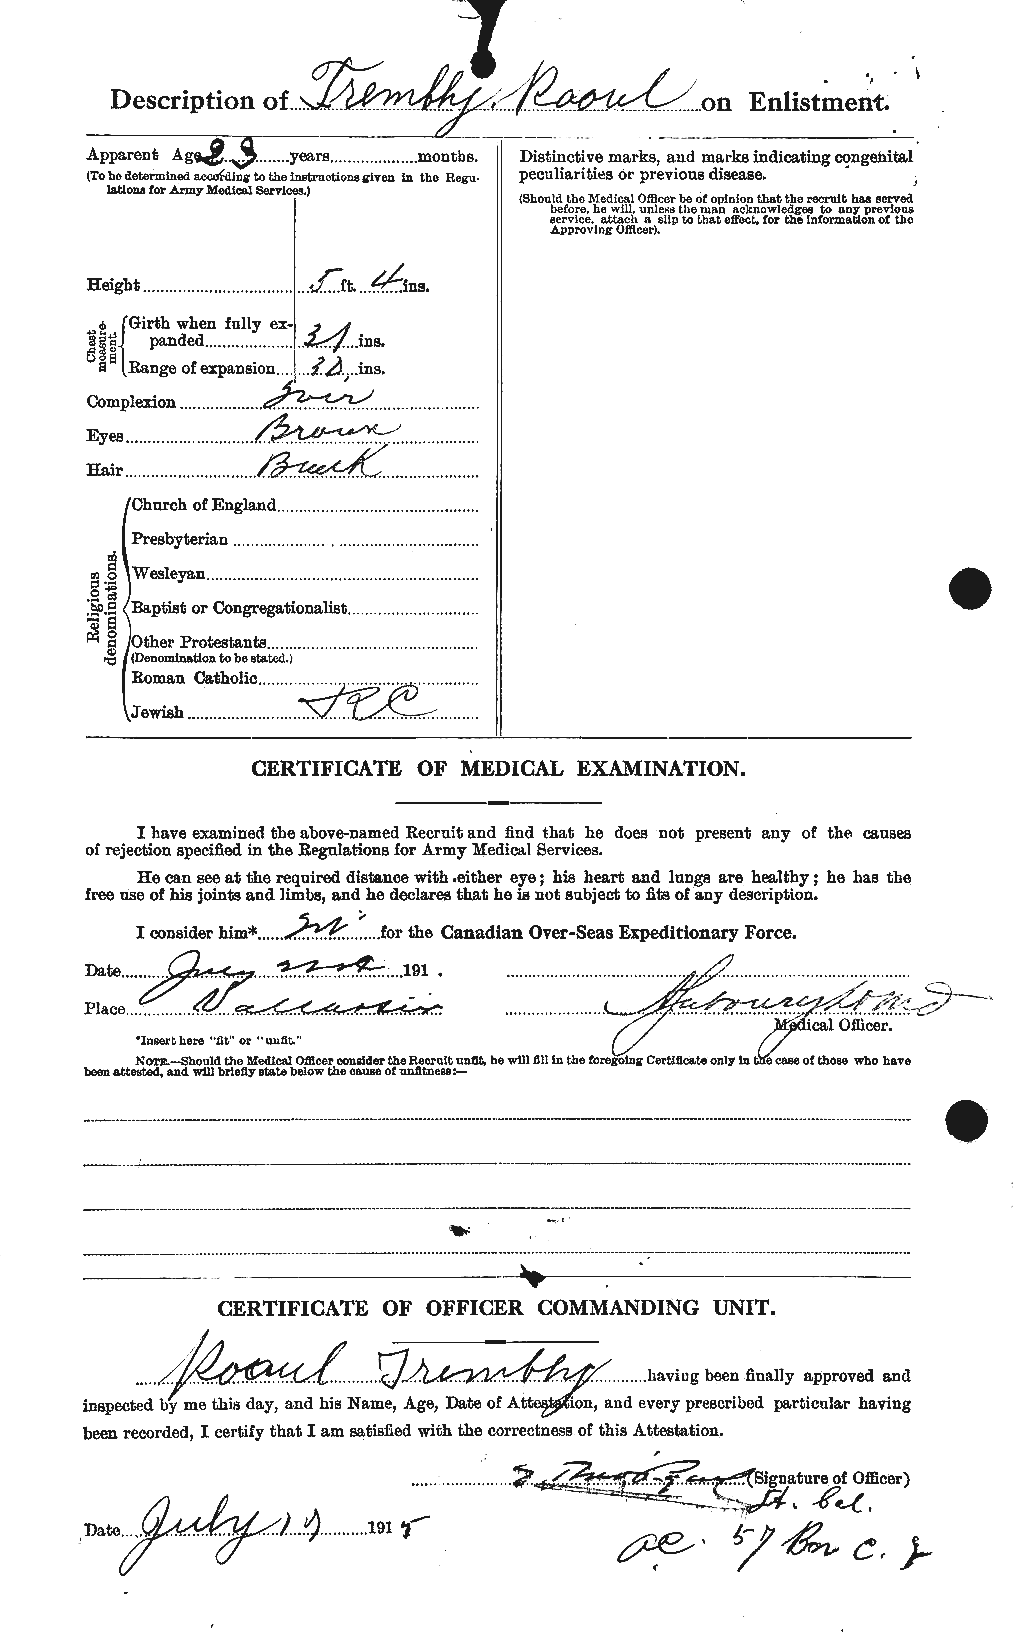 Personnel Records of the First World War - CEF 639247b